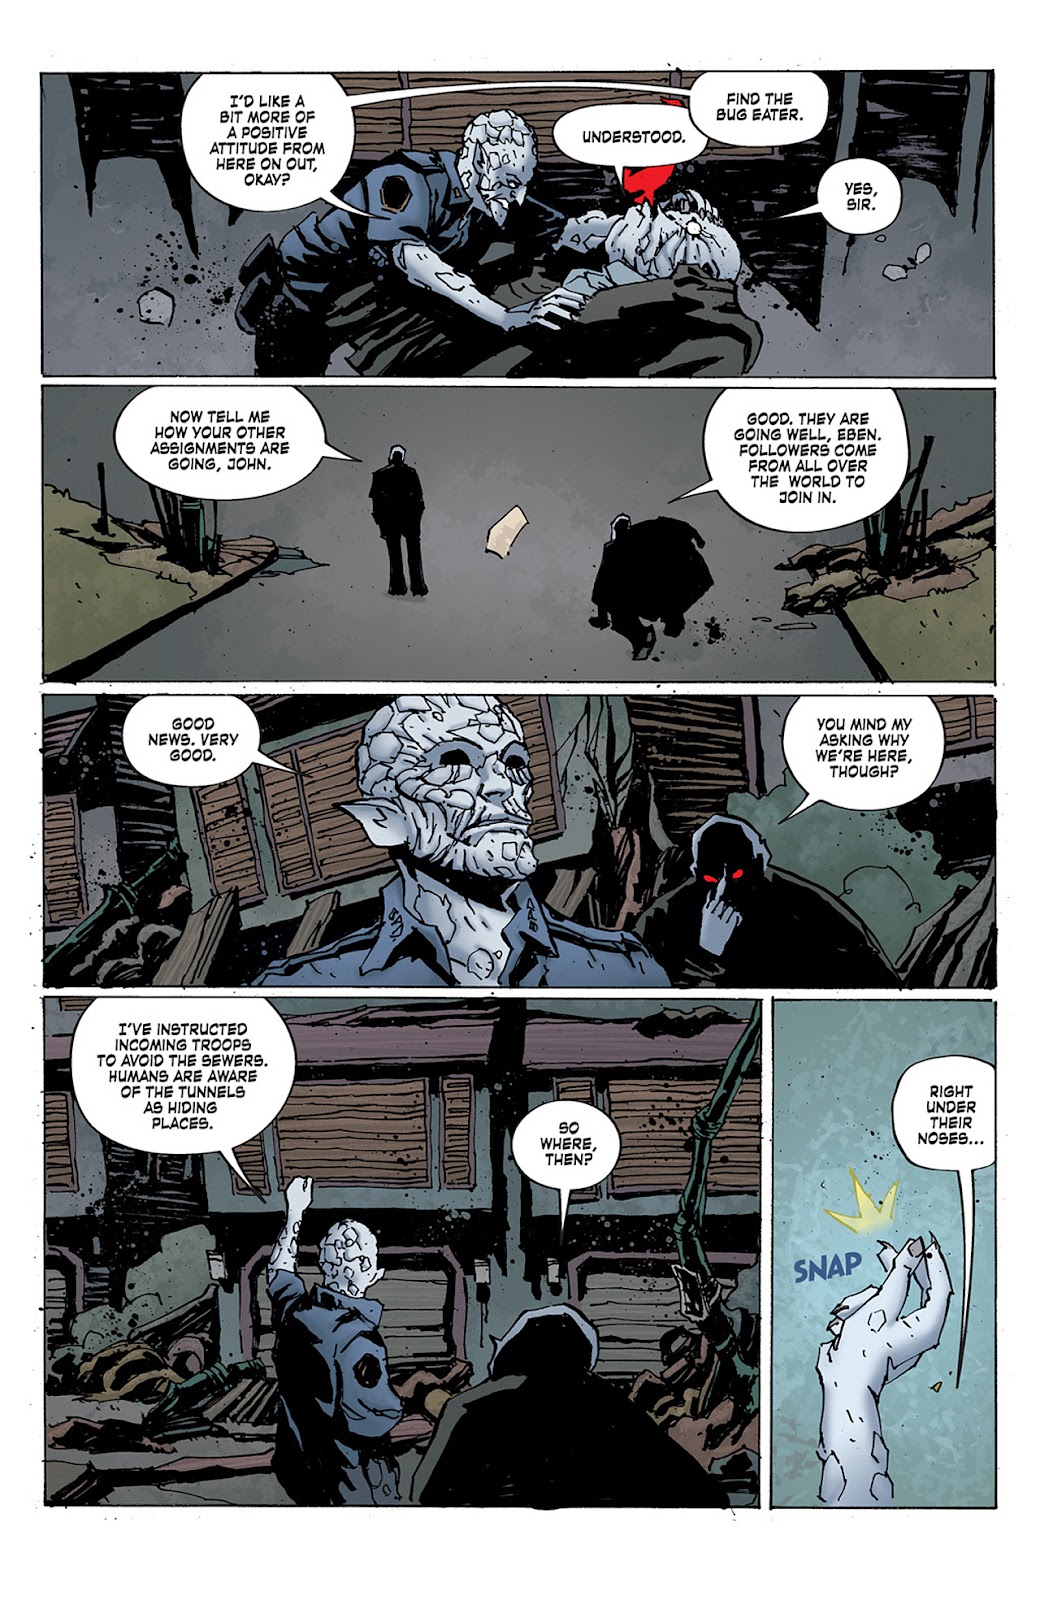 Criminal Macabre: Final Night - The 30 Days of Night Crossover issue 2 - Page 11